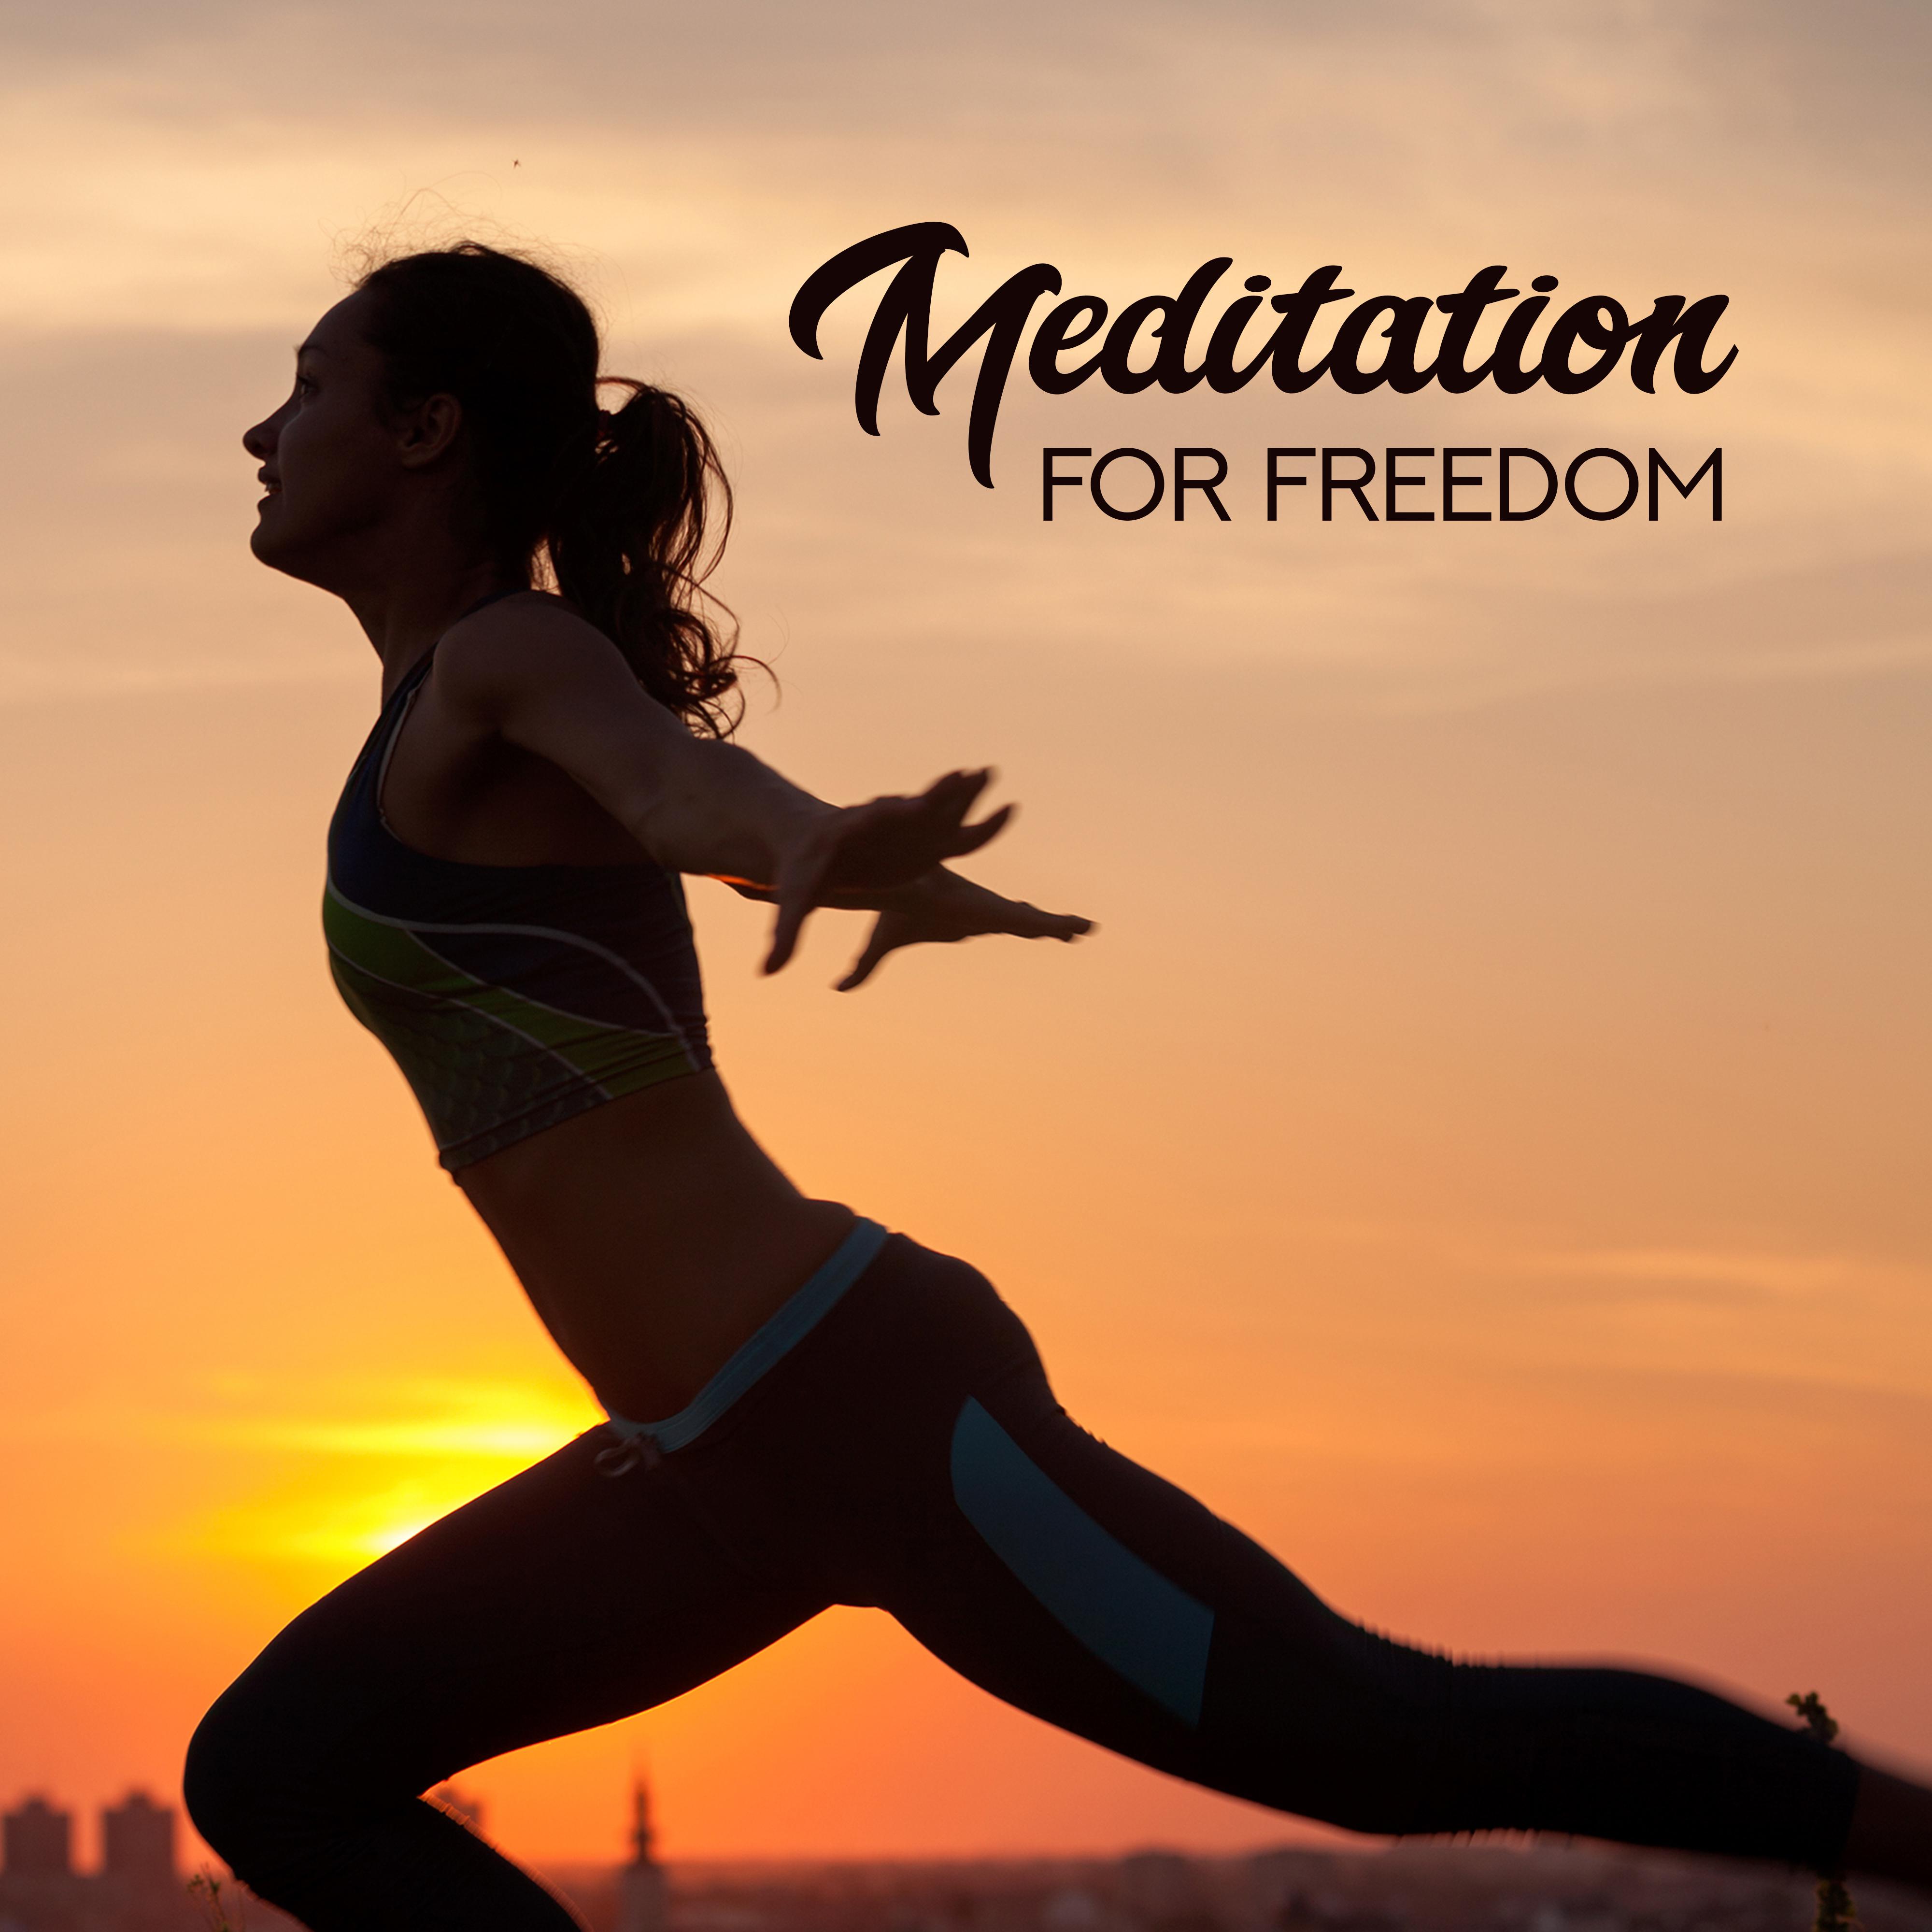 Meditation for Freedom  New Age Music for Relaxation, Yoga, Pure Meditation, Asian Relaxation, Zen Serenity, Meditation Music Zone, Ambient Yoga